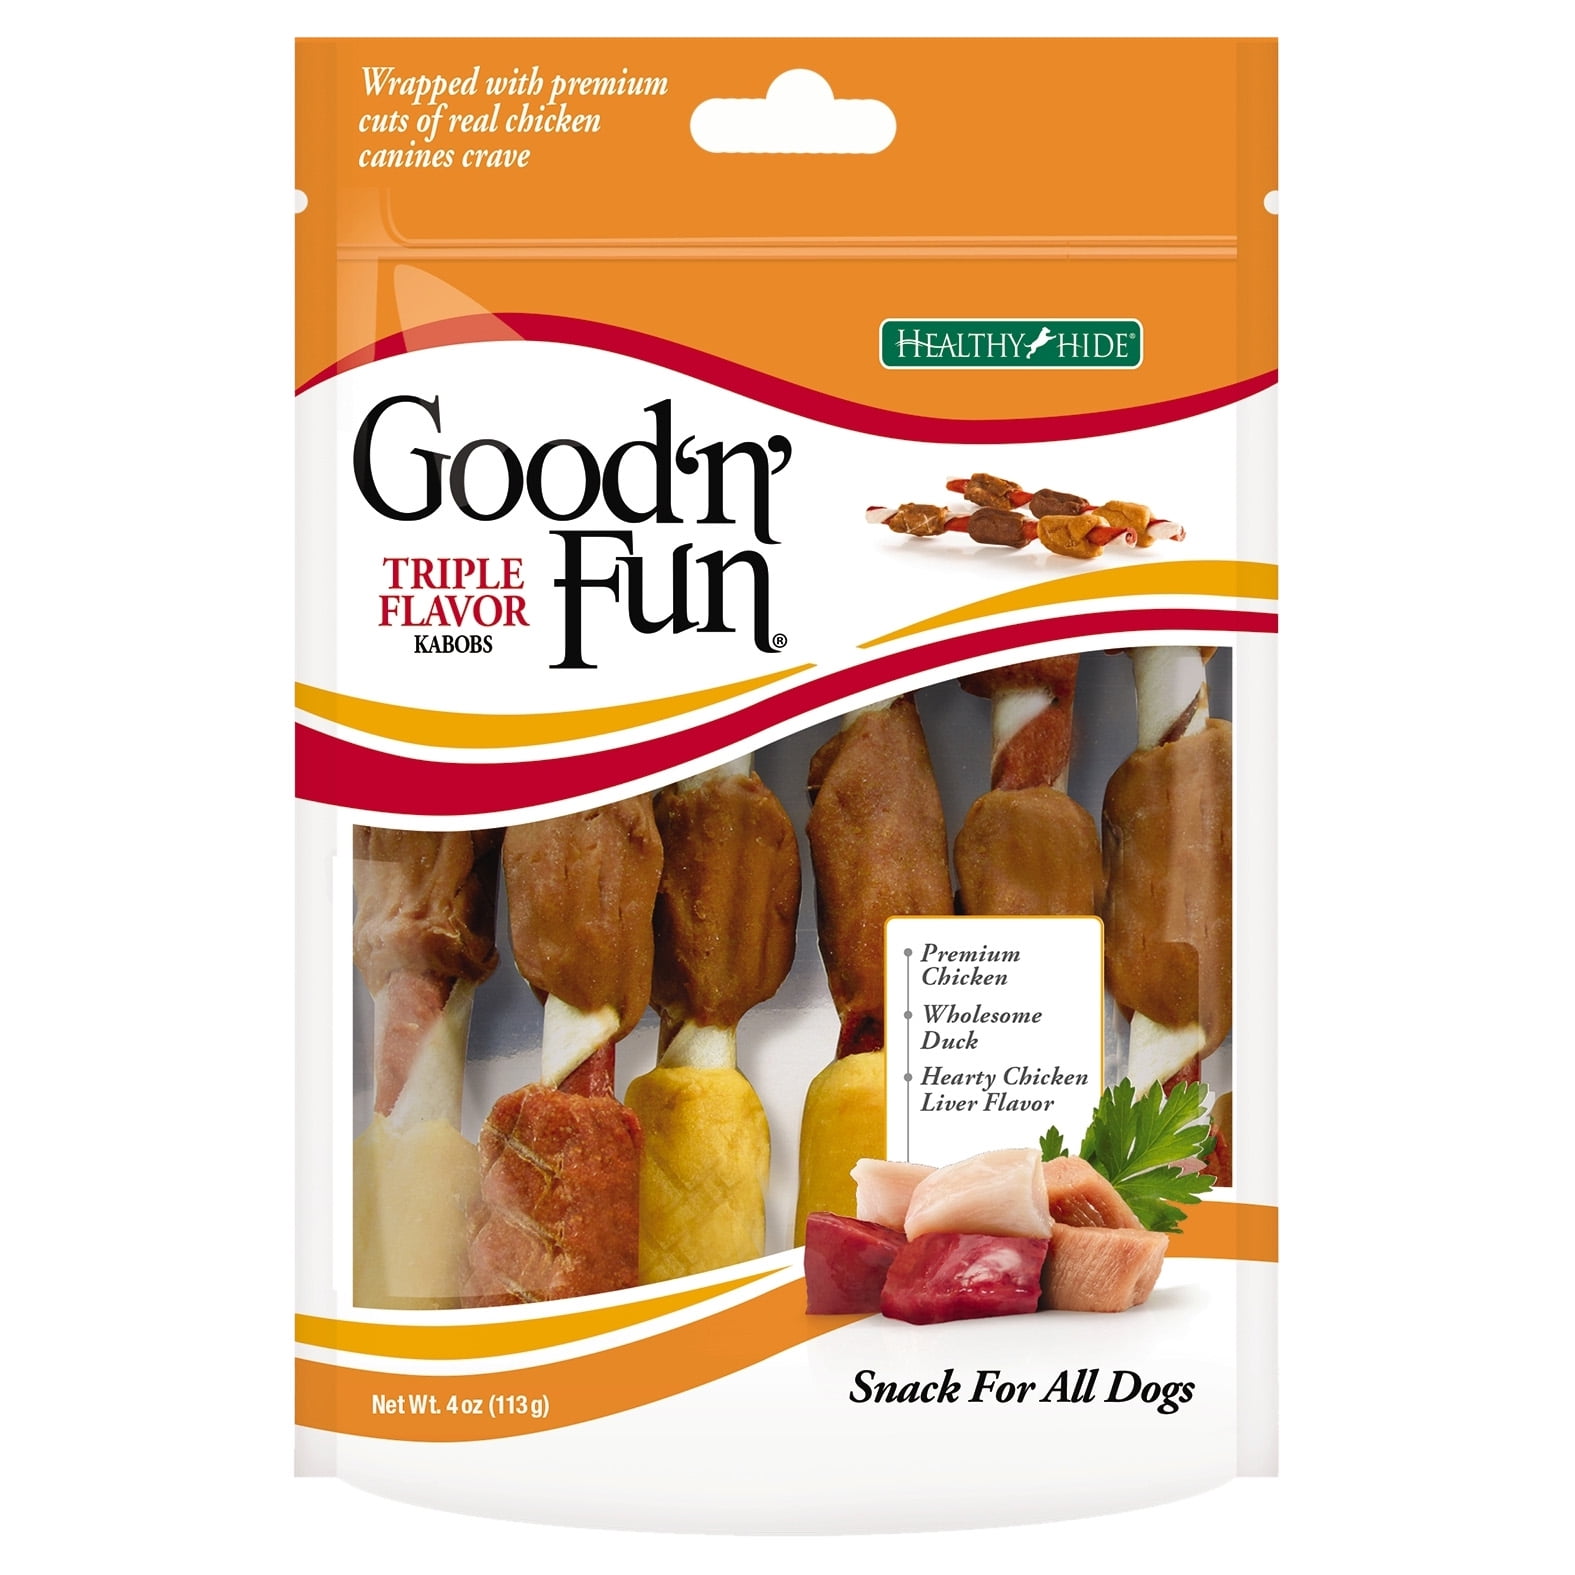 Good 'n' Fun Triple Flavor Kabobs Snack for All Dogs, 4.0 oz